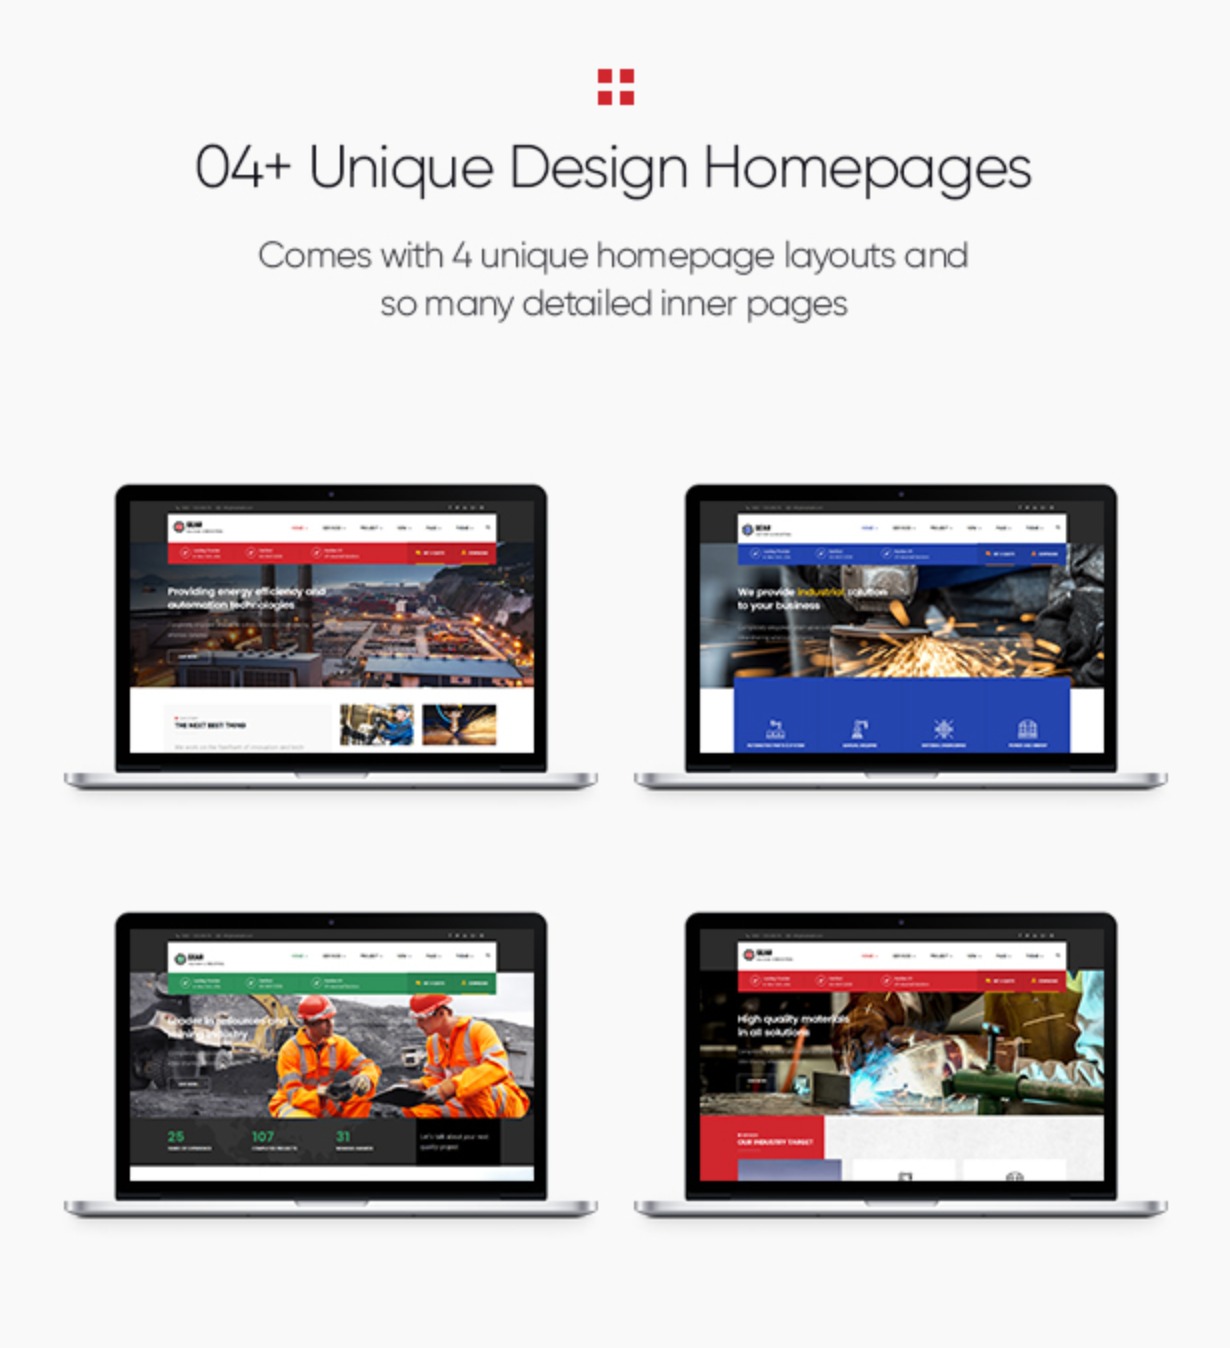 Gear - Factory and Industry Business WordPress Theme 04+ homepages